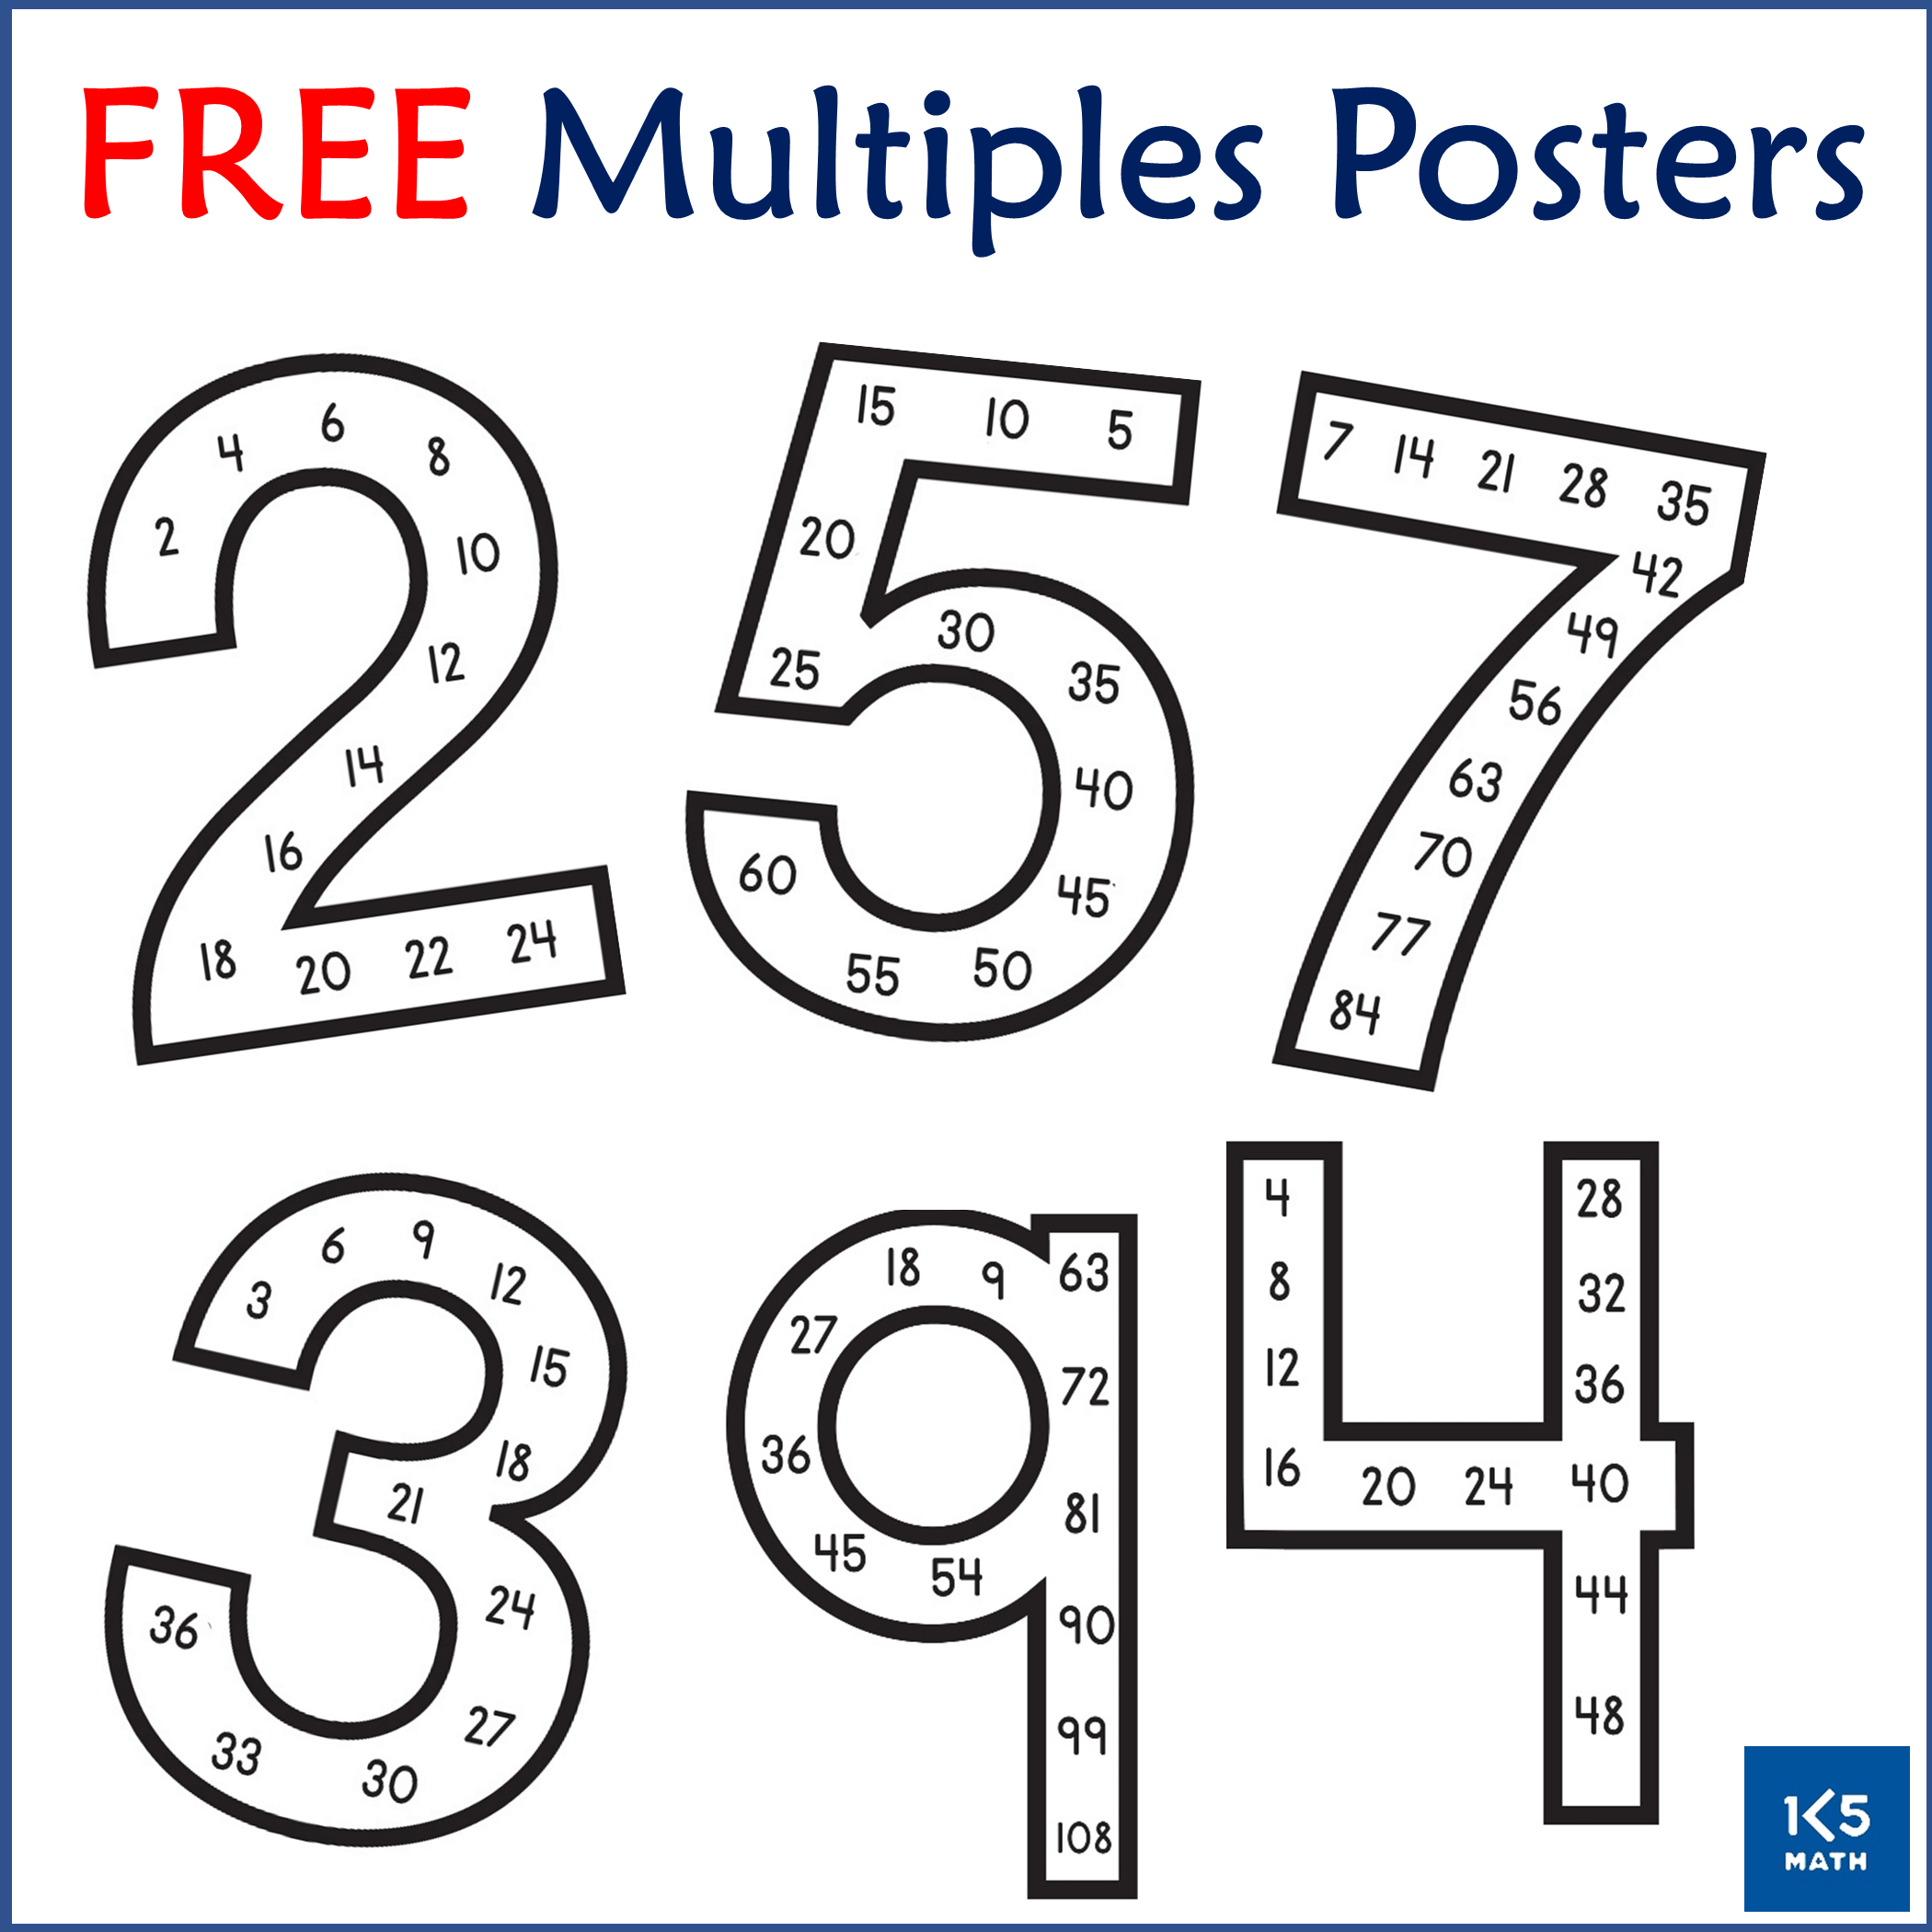 Download FREE Multiples Posters here